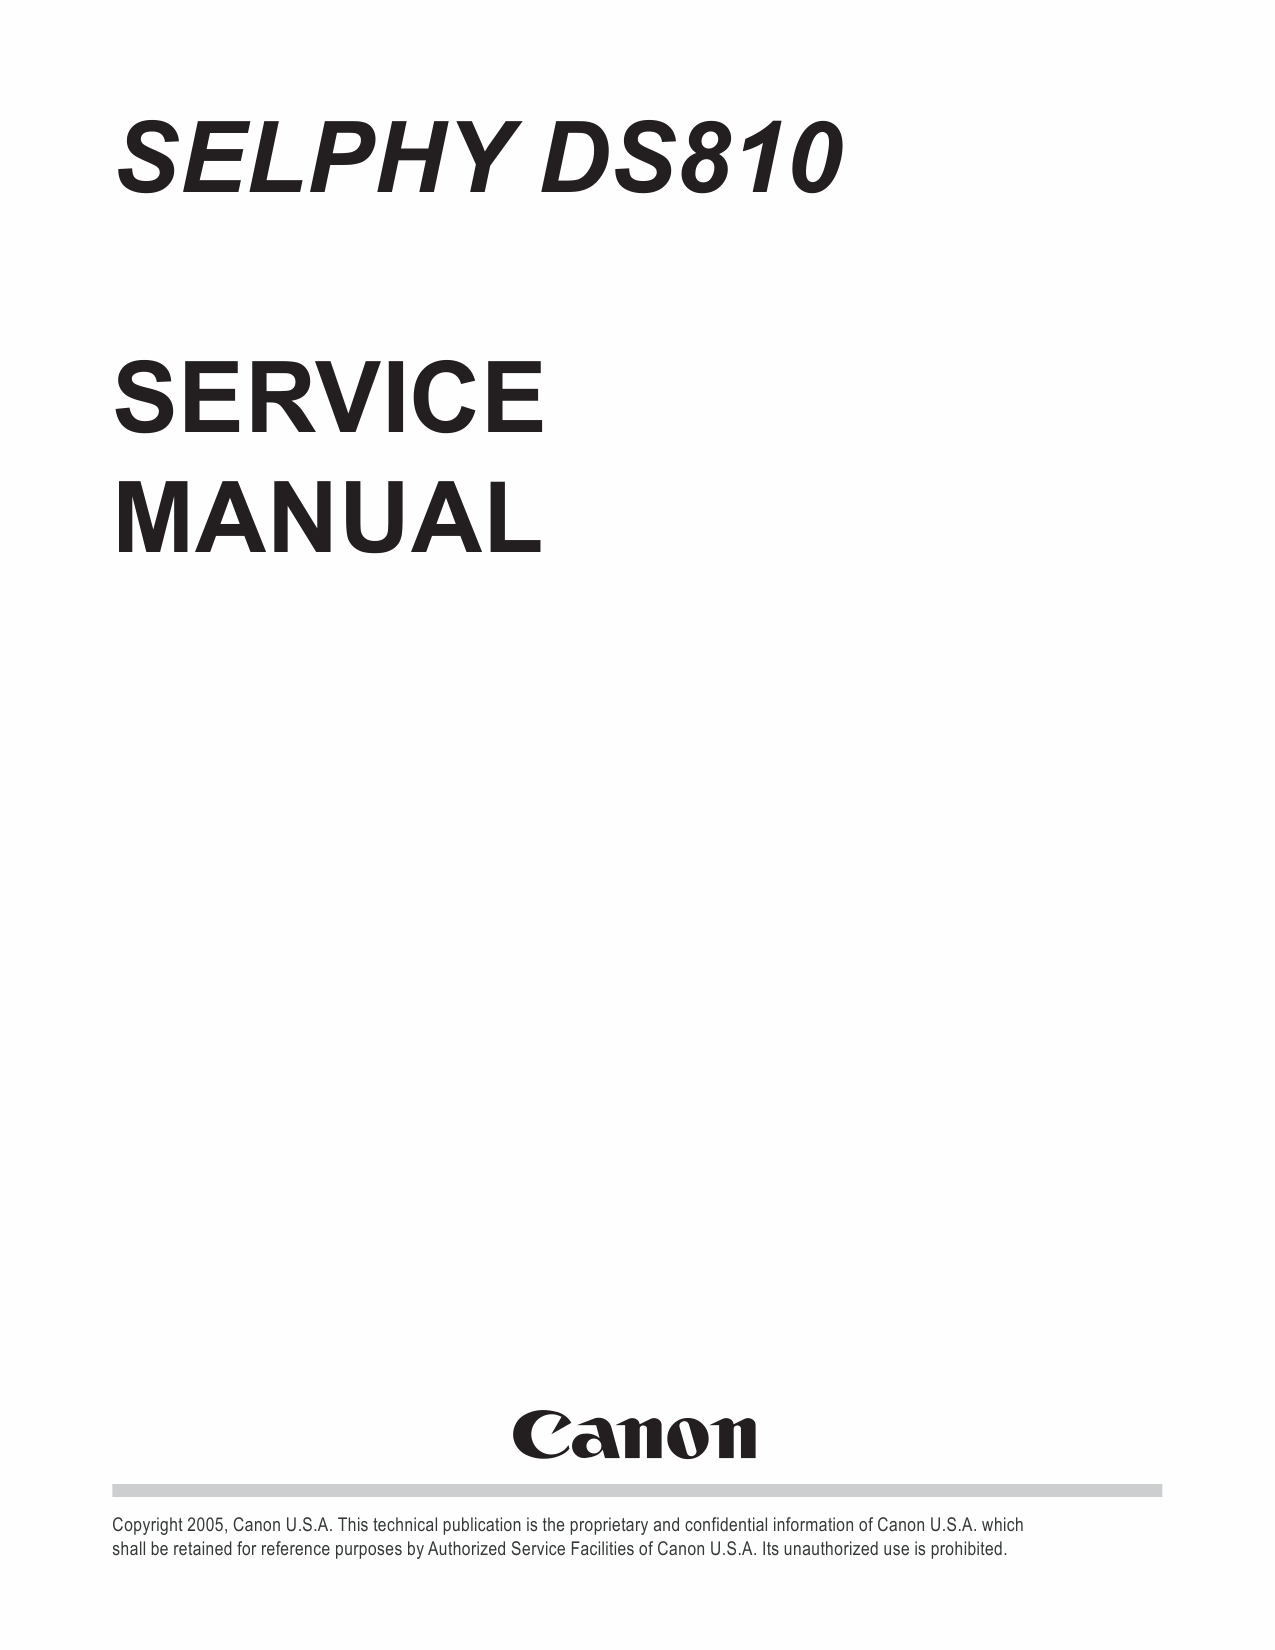 Canon SELPHY DS810 Service and Parts Manual-1